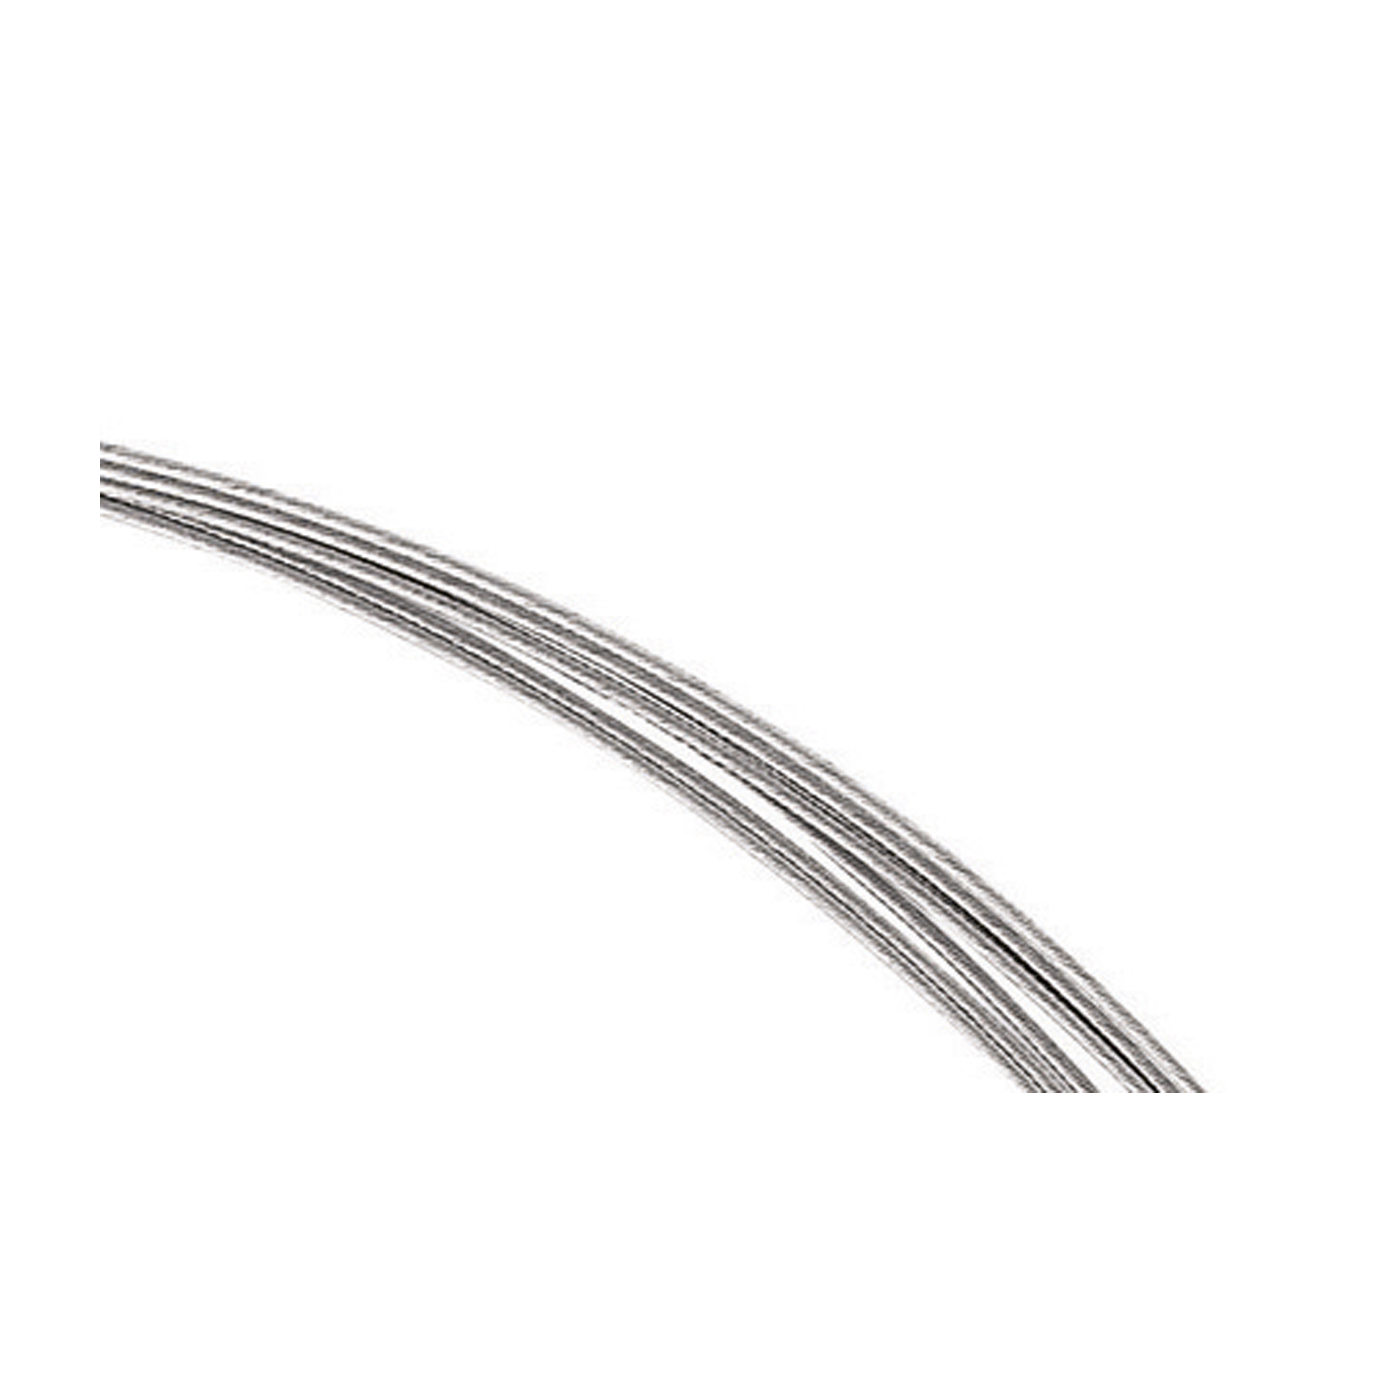 Steel Cable Neck Wire, 7-Strand, ø 0.3 mm, 45 cm - 1 piece